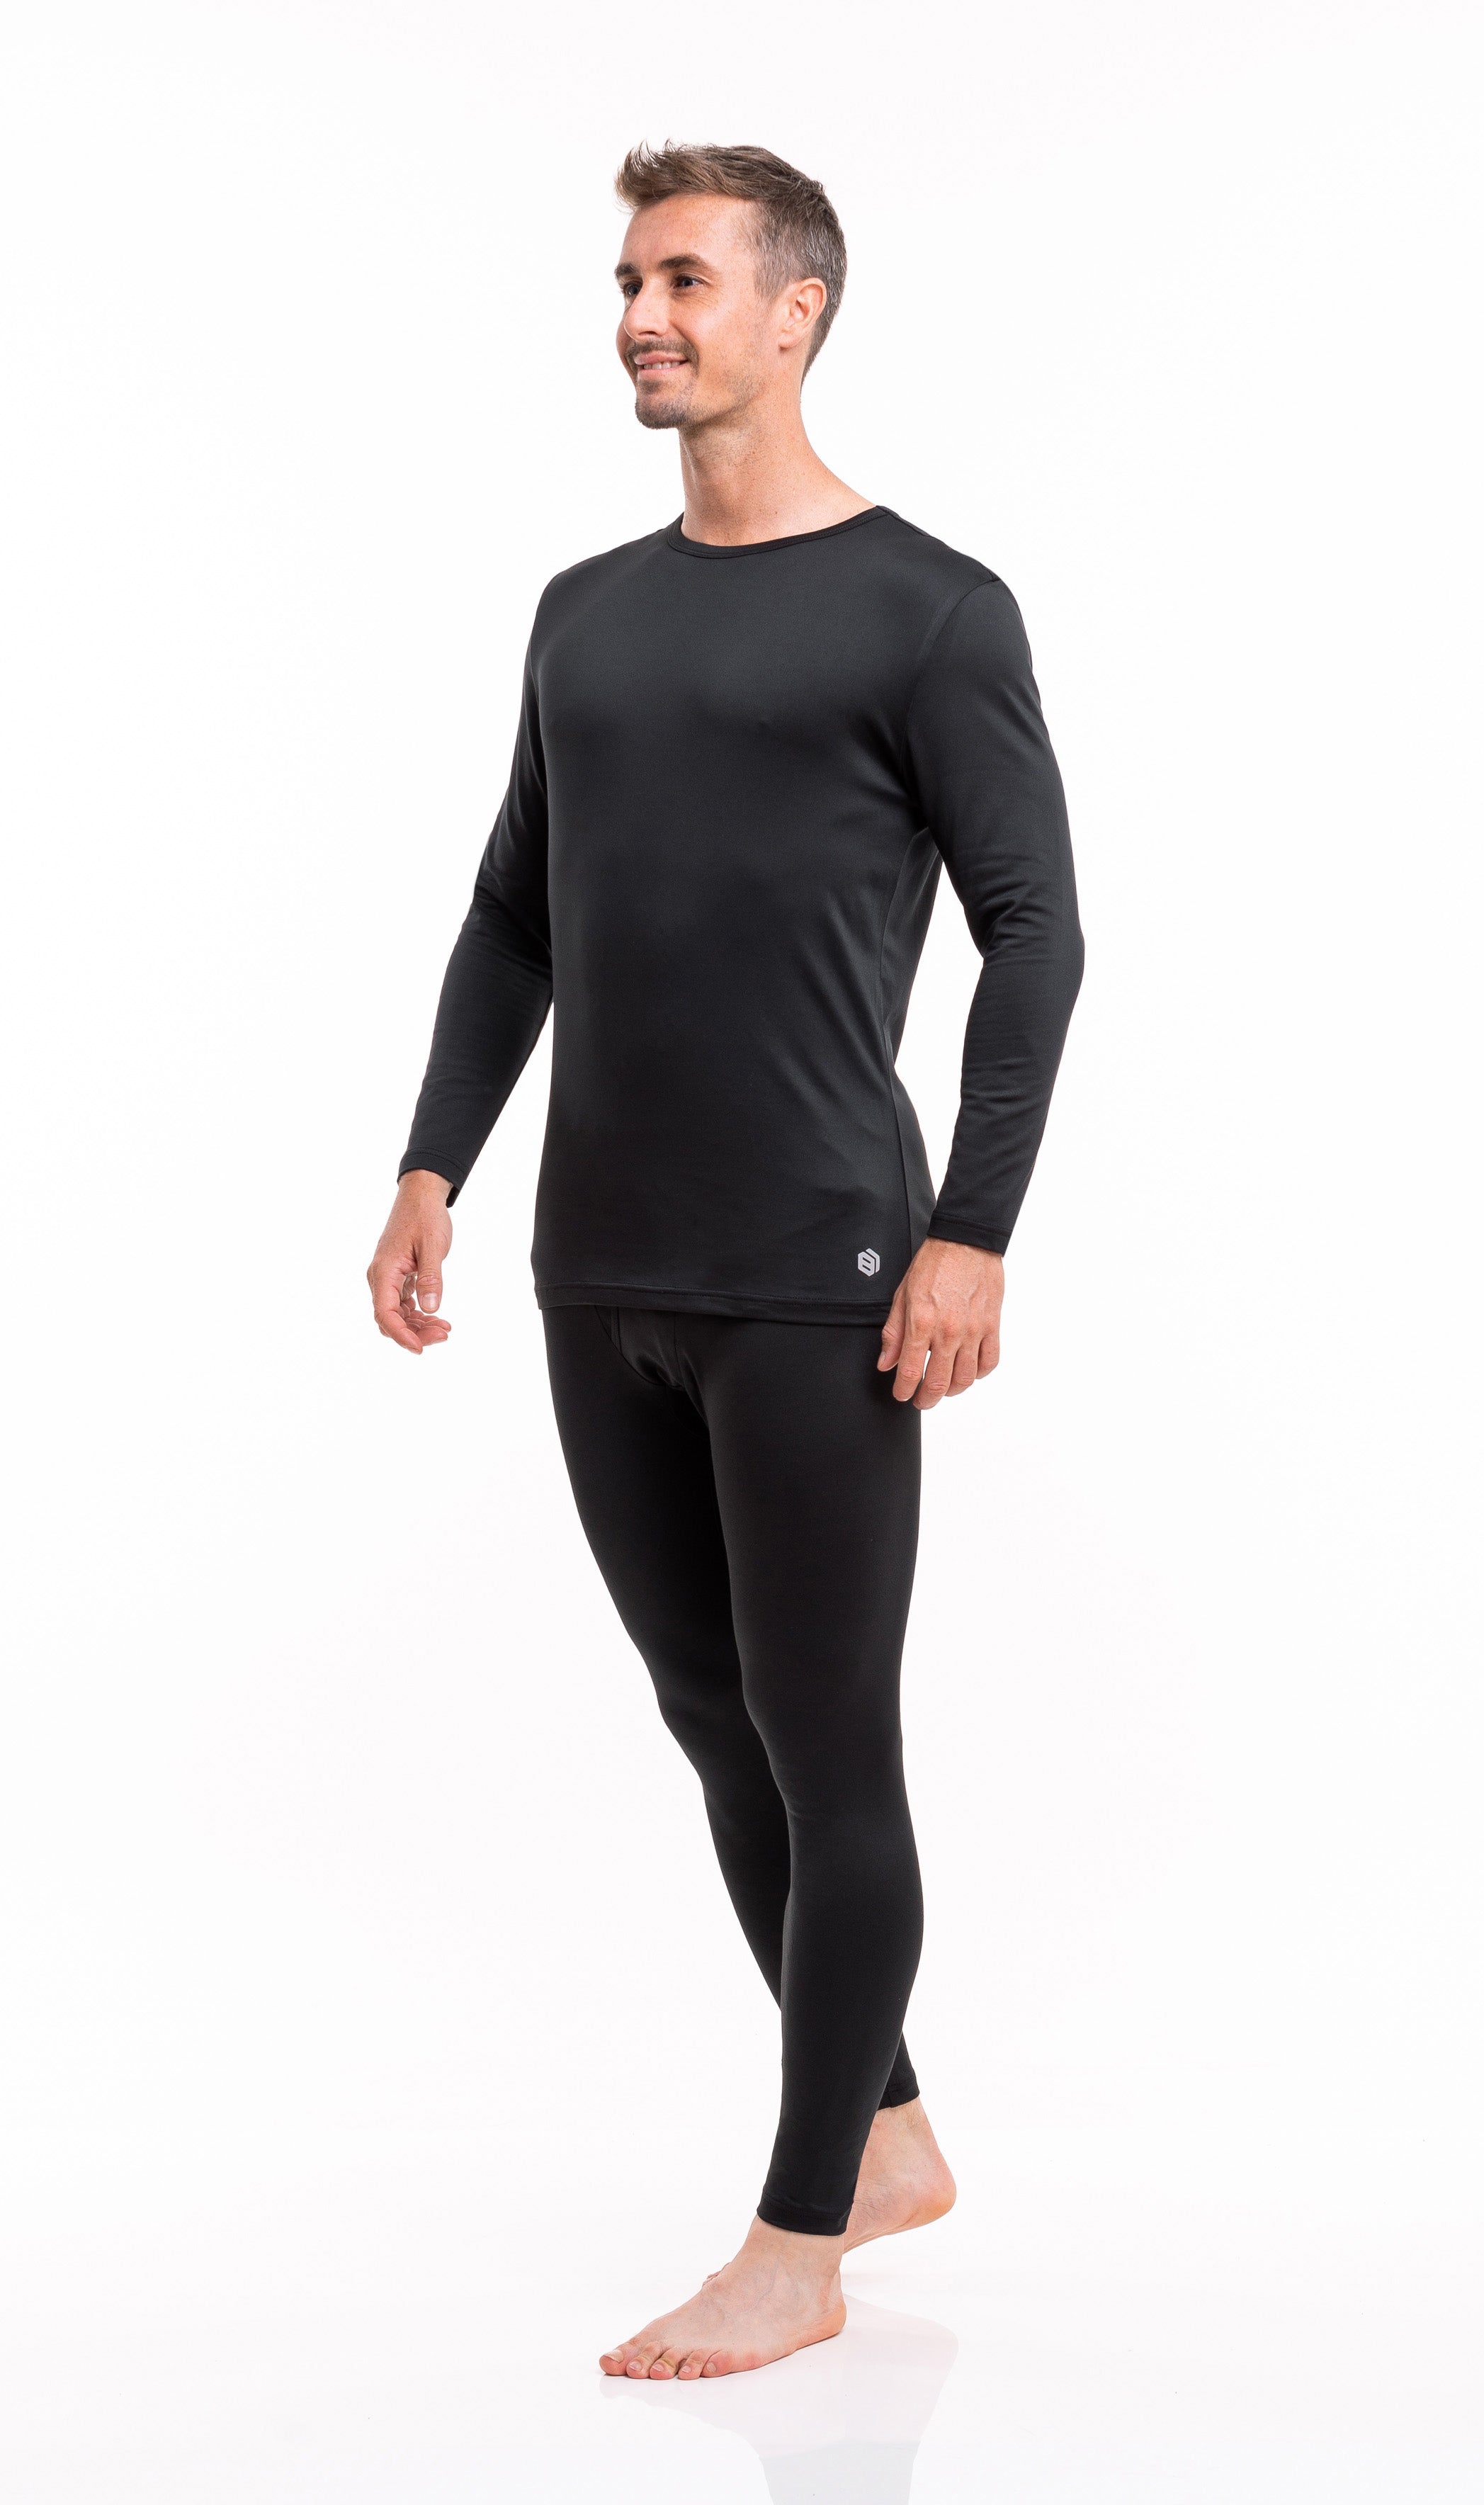 Man Technique, Thermal and Breathable Underwear Shirt